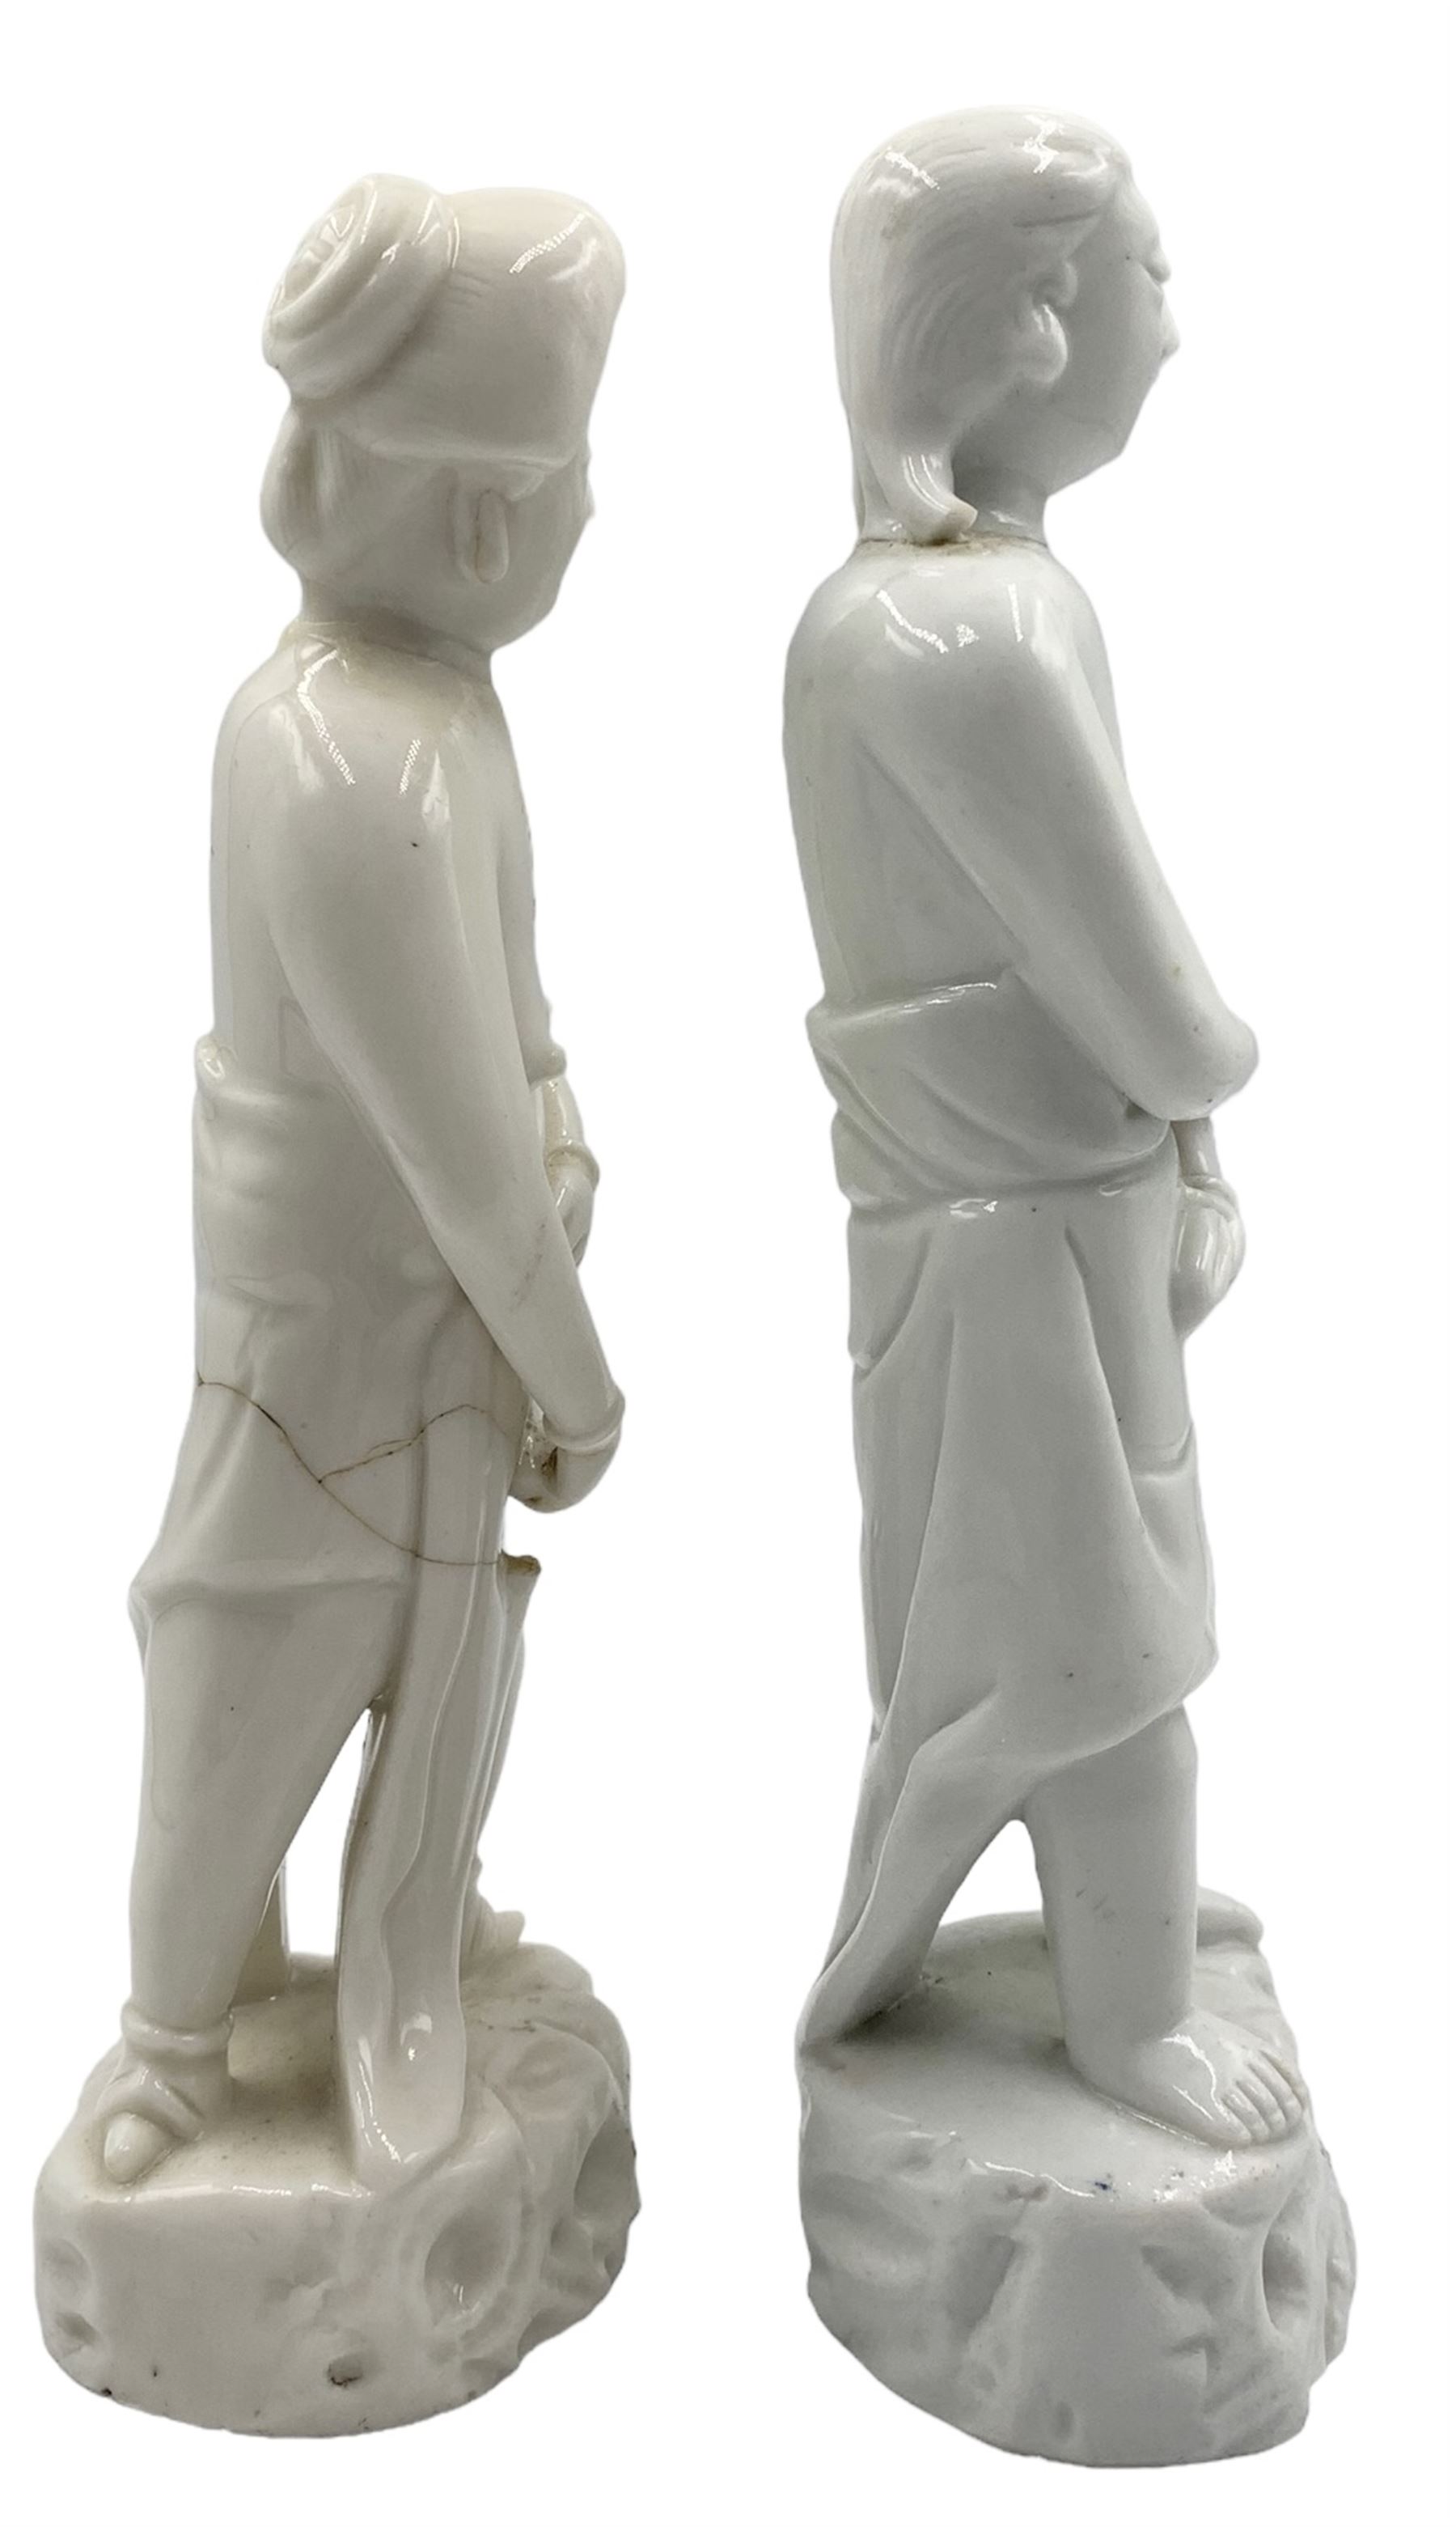 Matched pair of Qing dynasty 18th century Chinese Blanc de Chine porcelain 'Adam and Eve' figures - Image 2 of 6